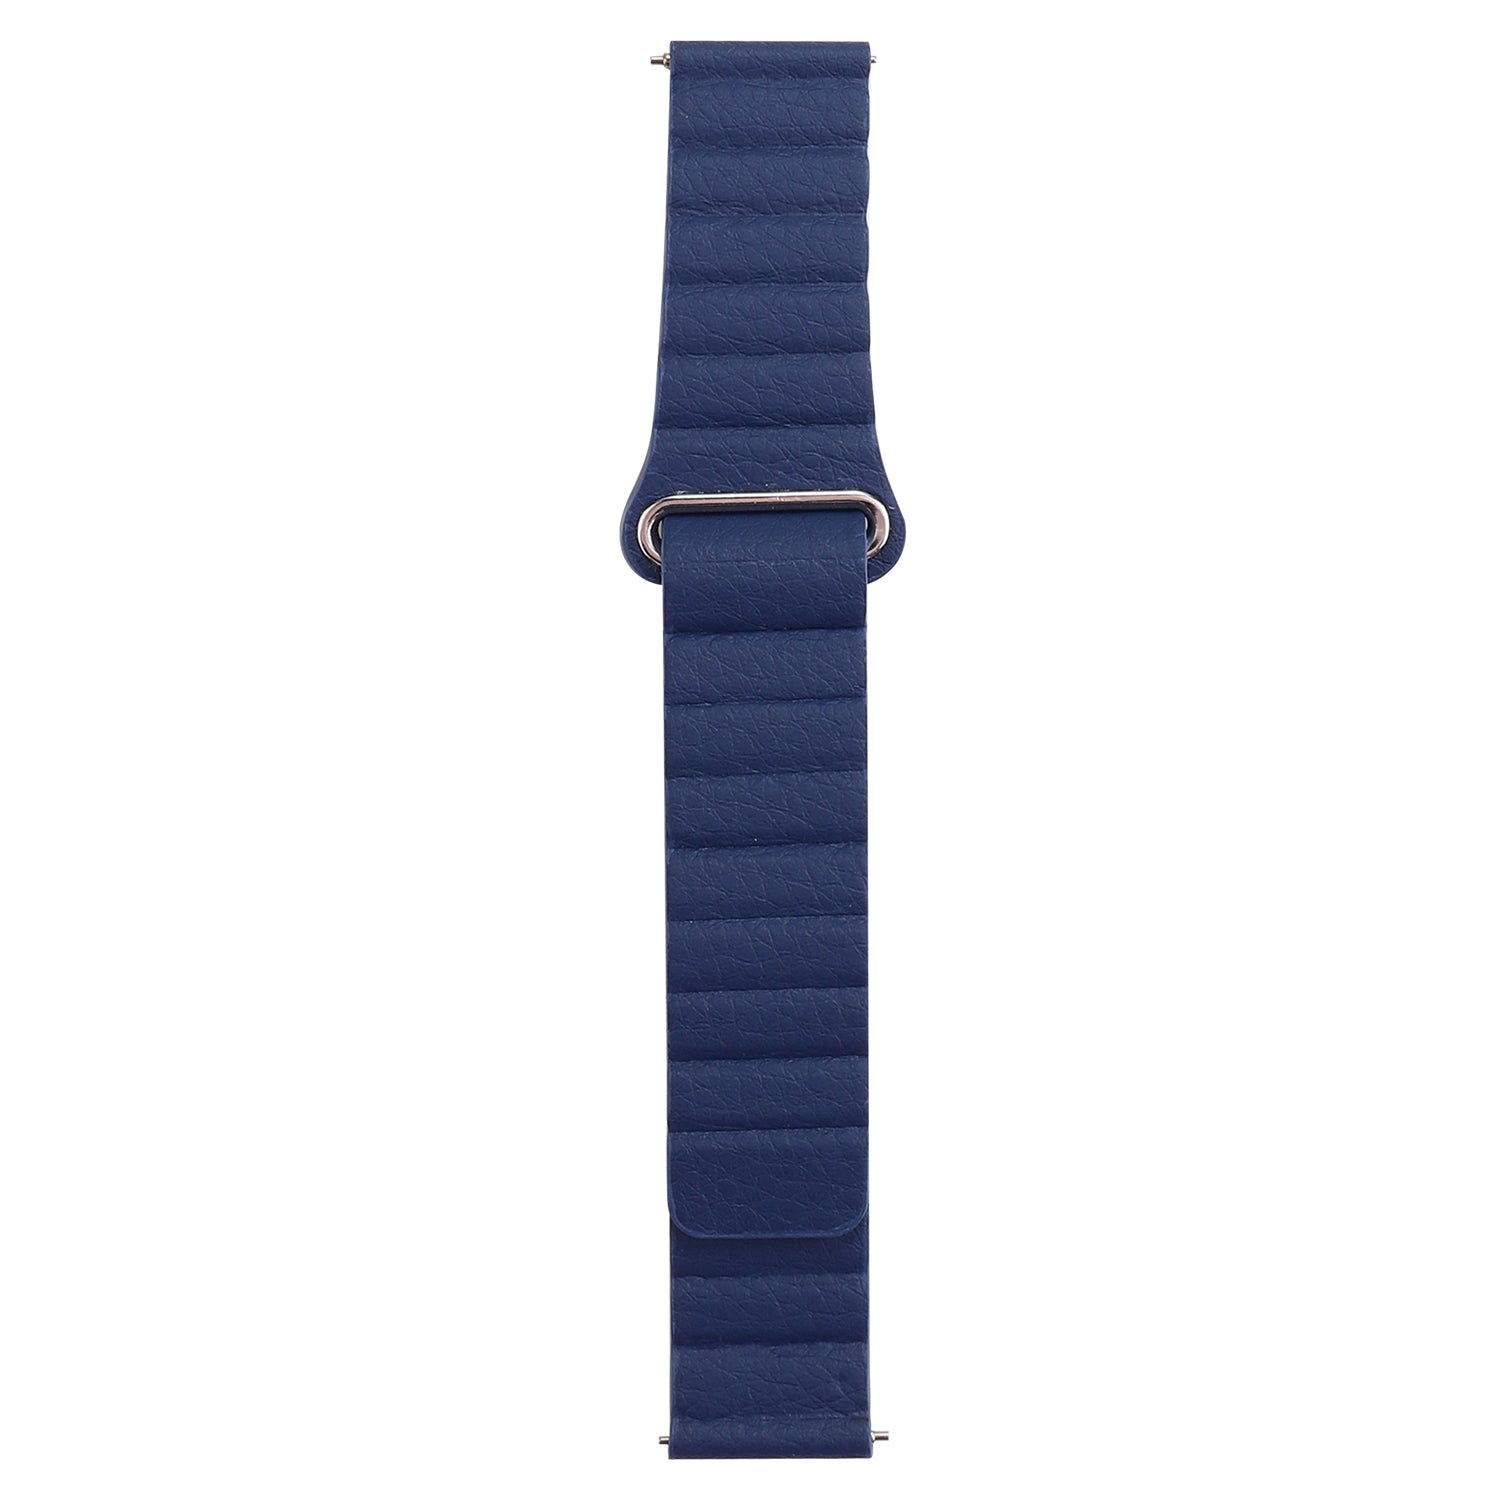 Genuine Leather Watchband Replacement 18mm for Garmin Move 3S/Active S - Dark Blue